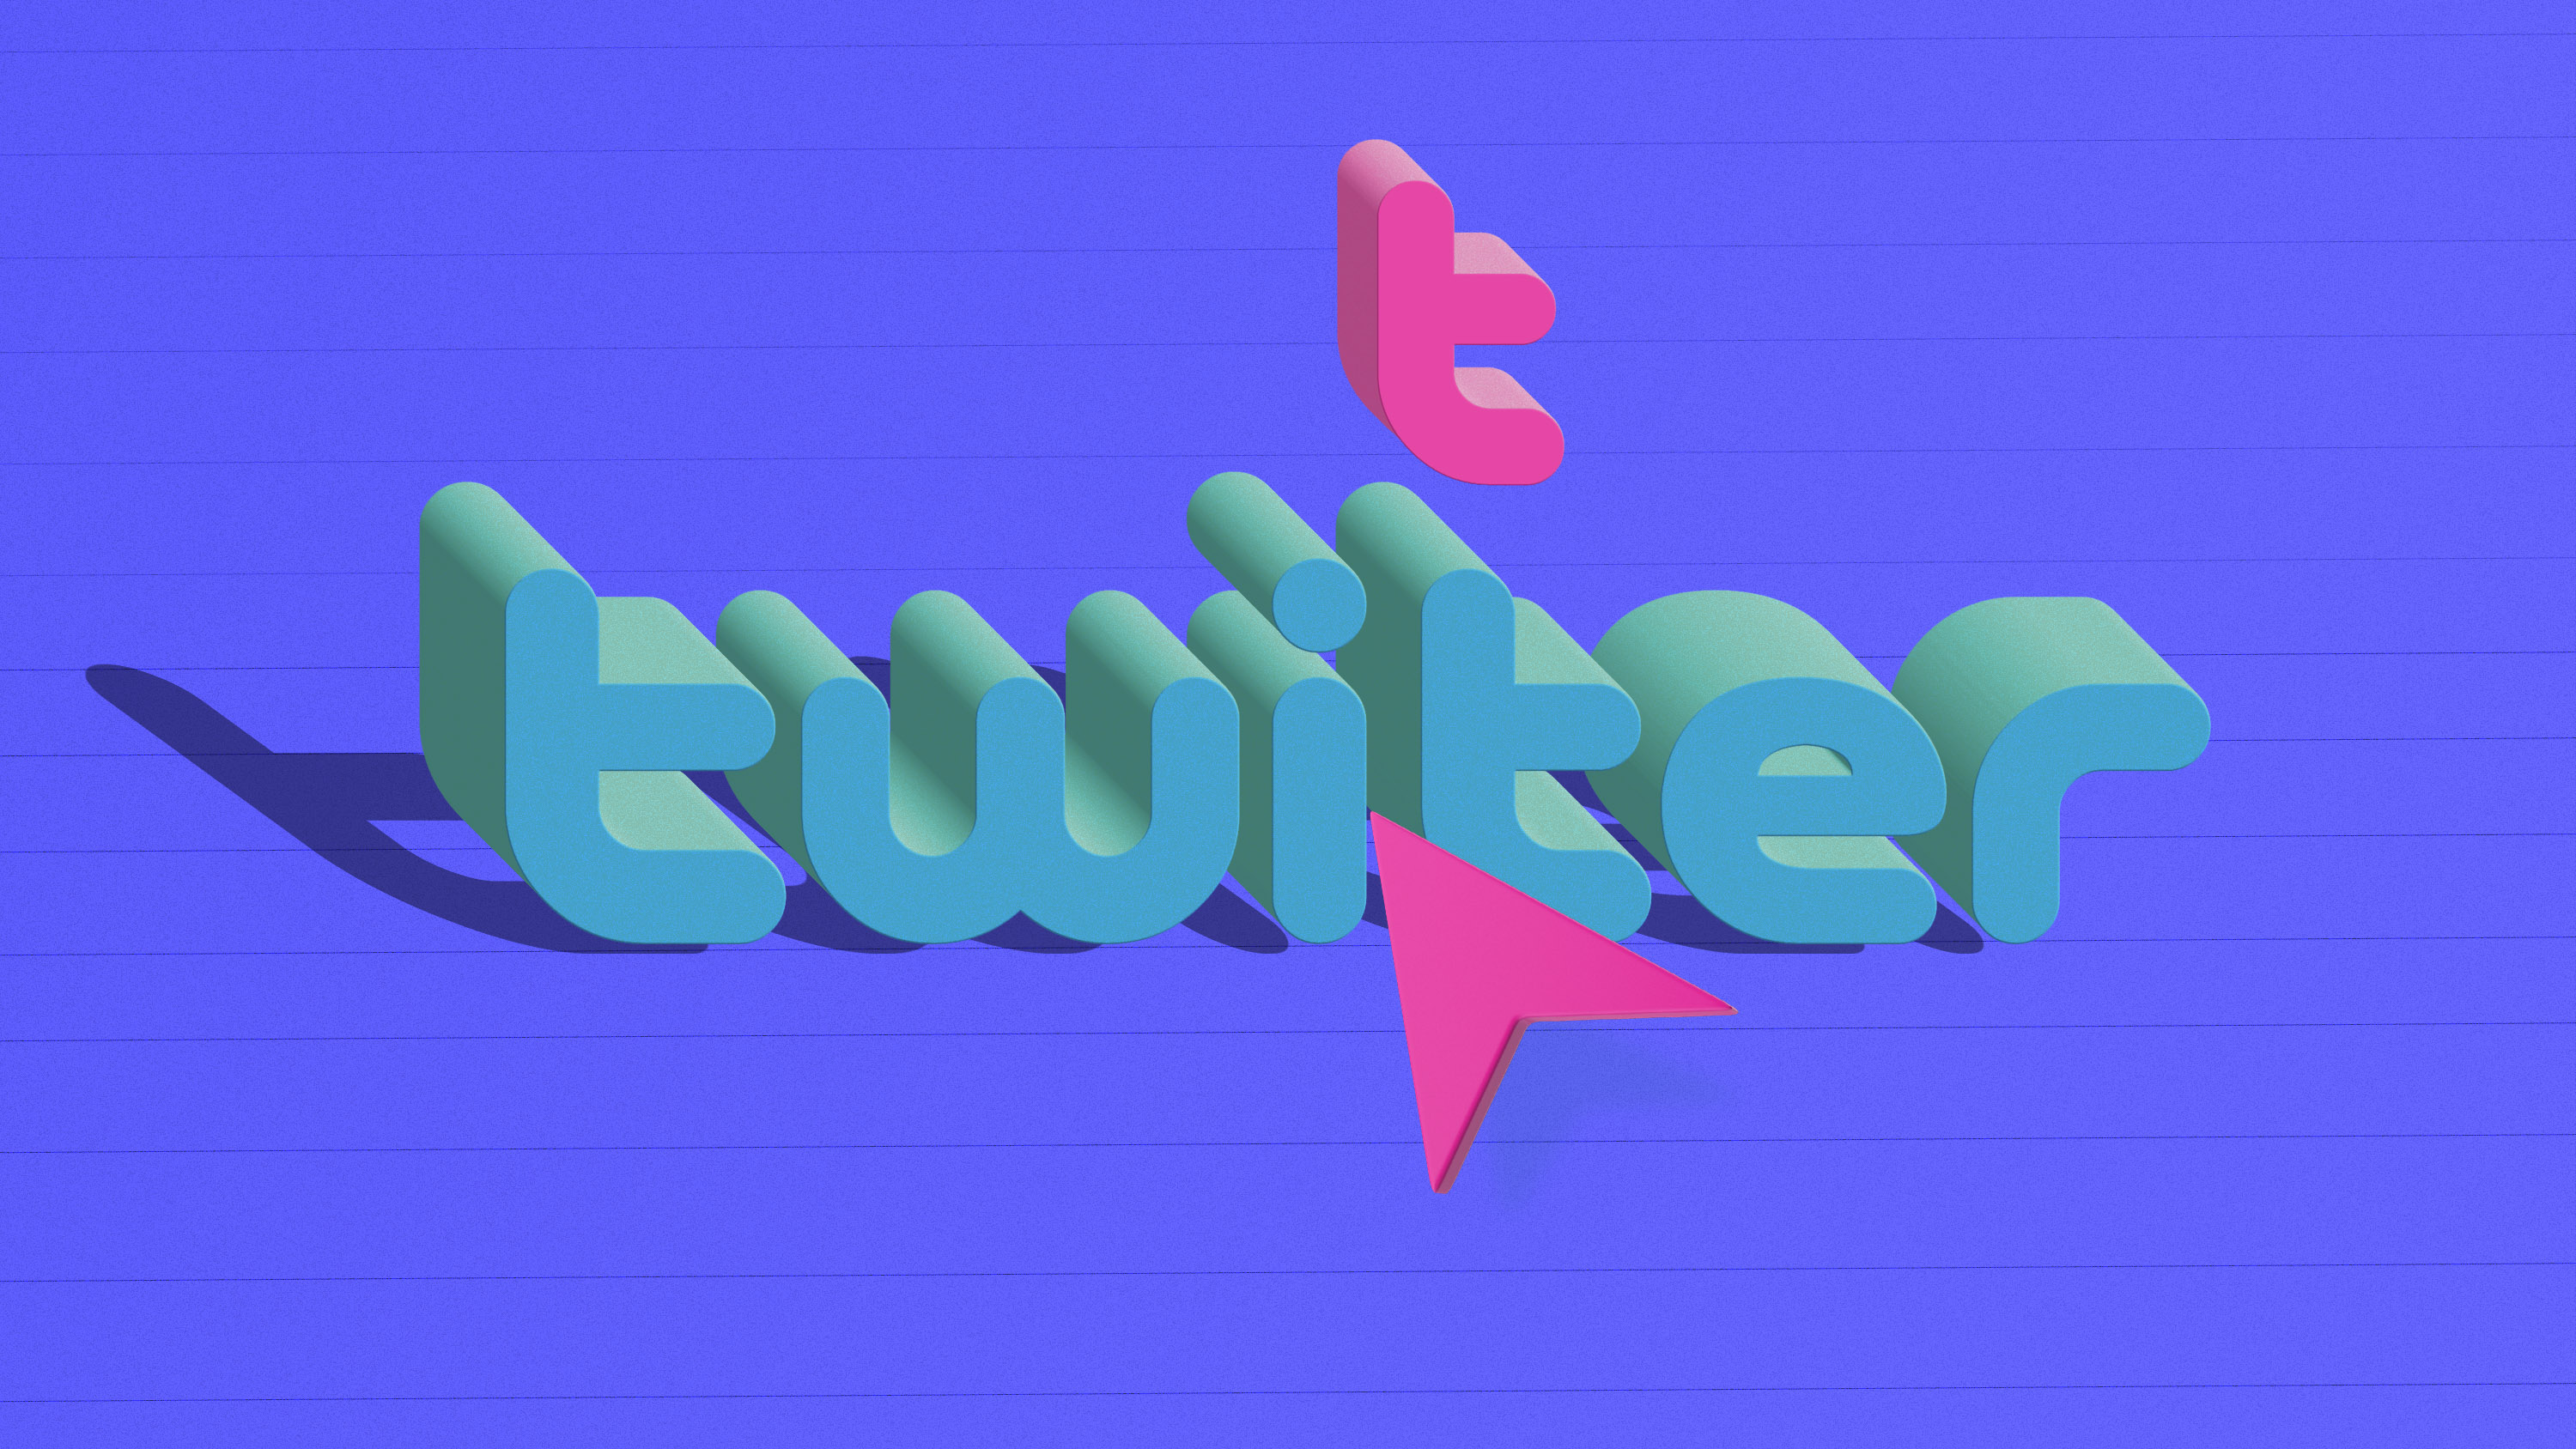 twitter text logo with insert copyedit symbol to add a missing letter T